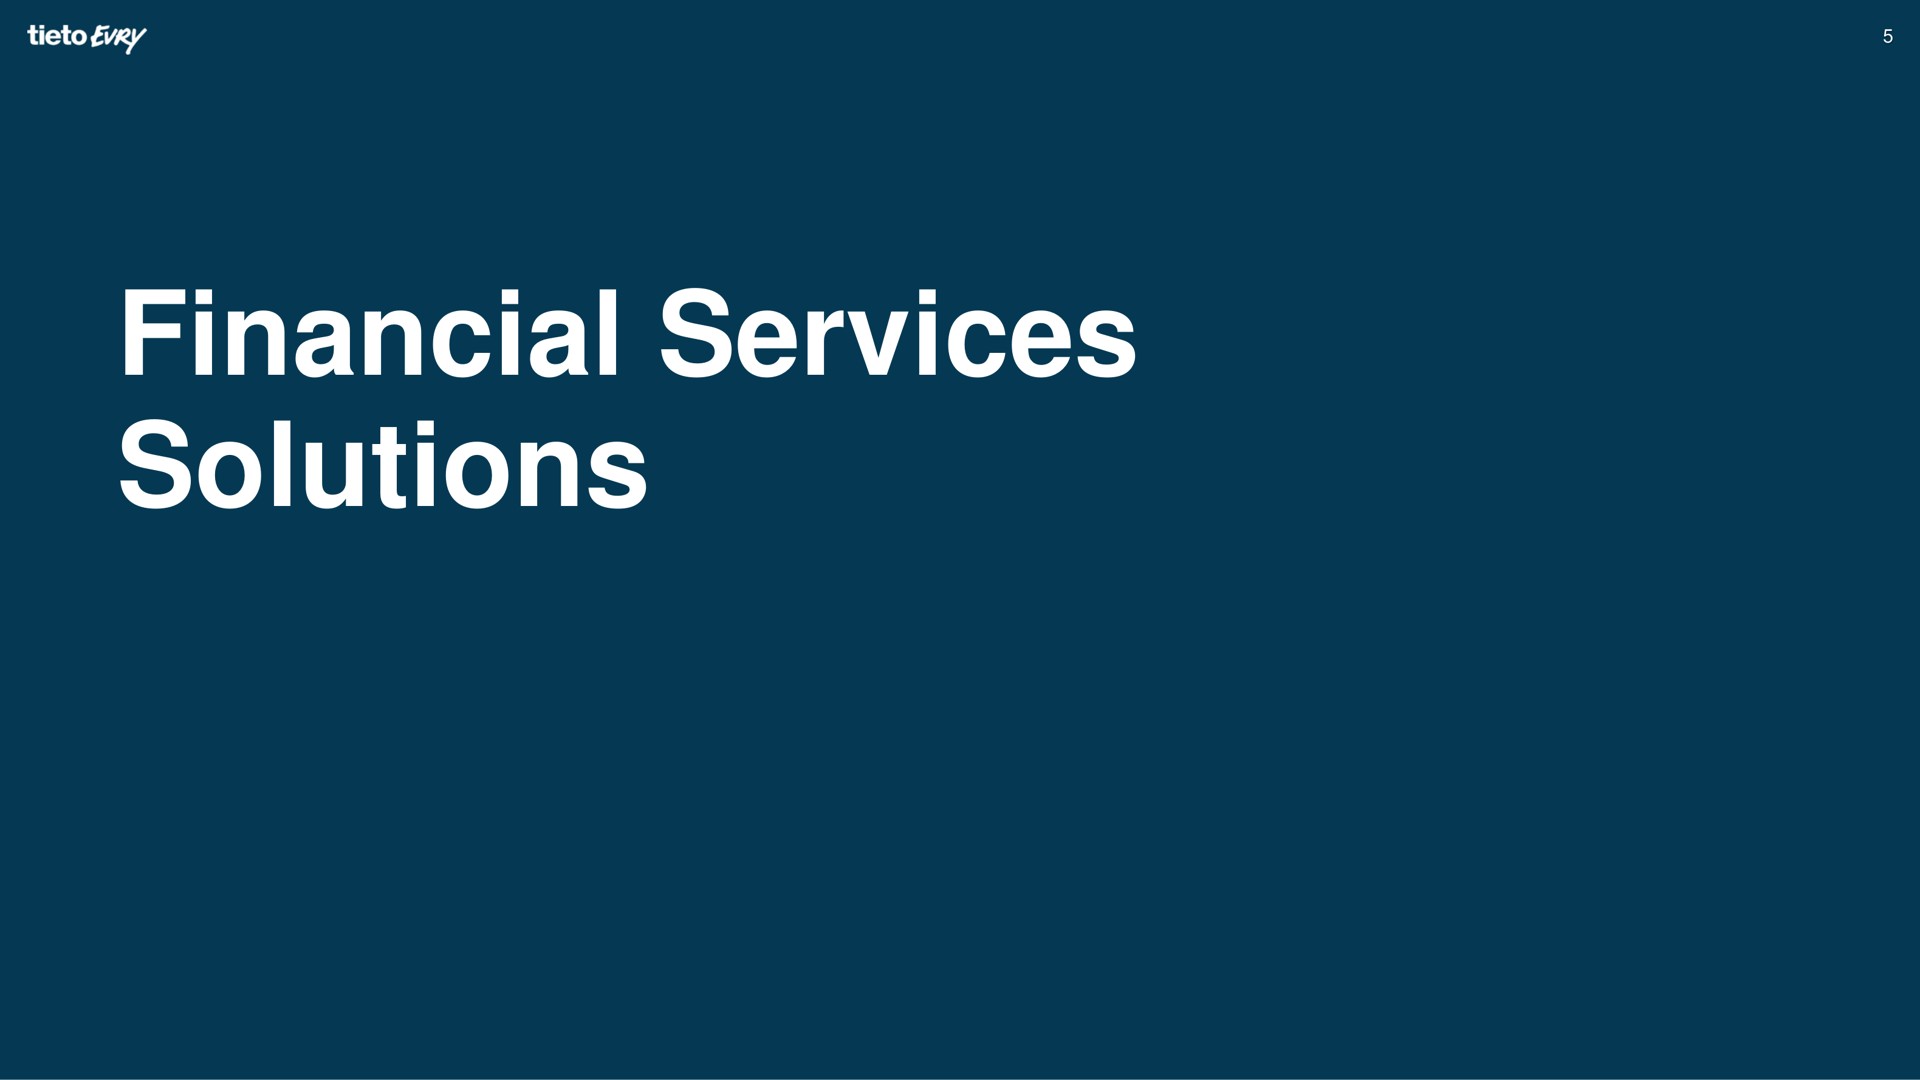 financial services solutions | Tietoevry